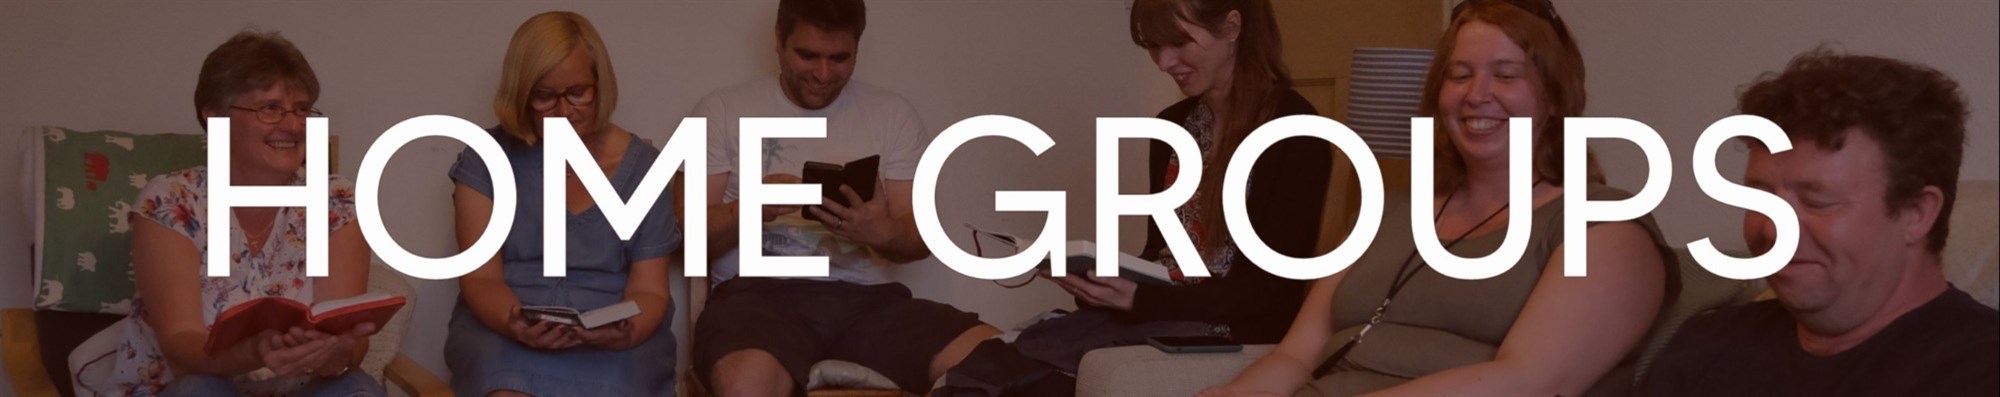 Home Groups Page Banner